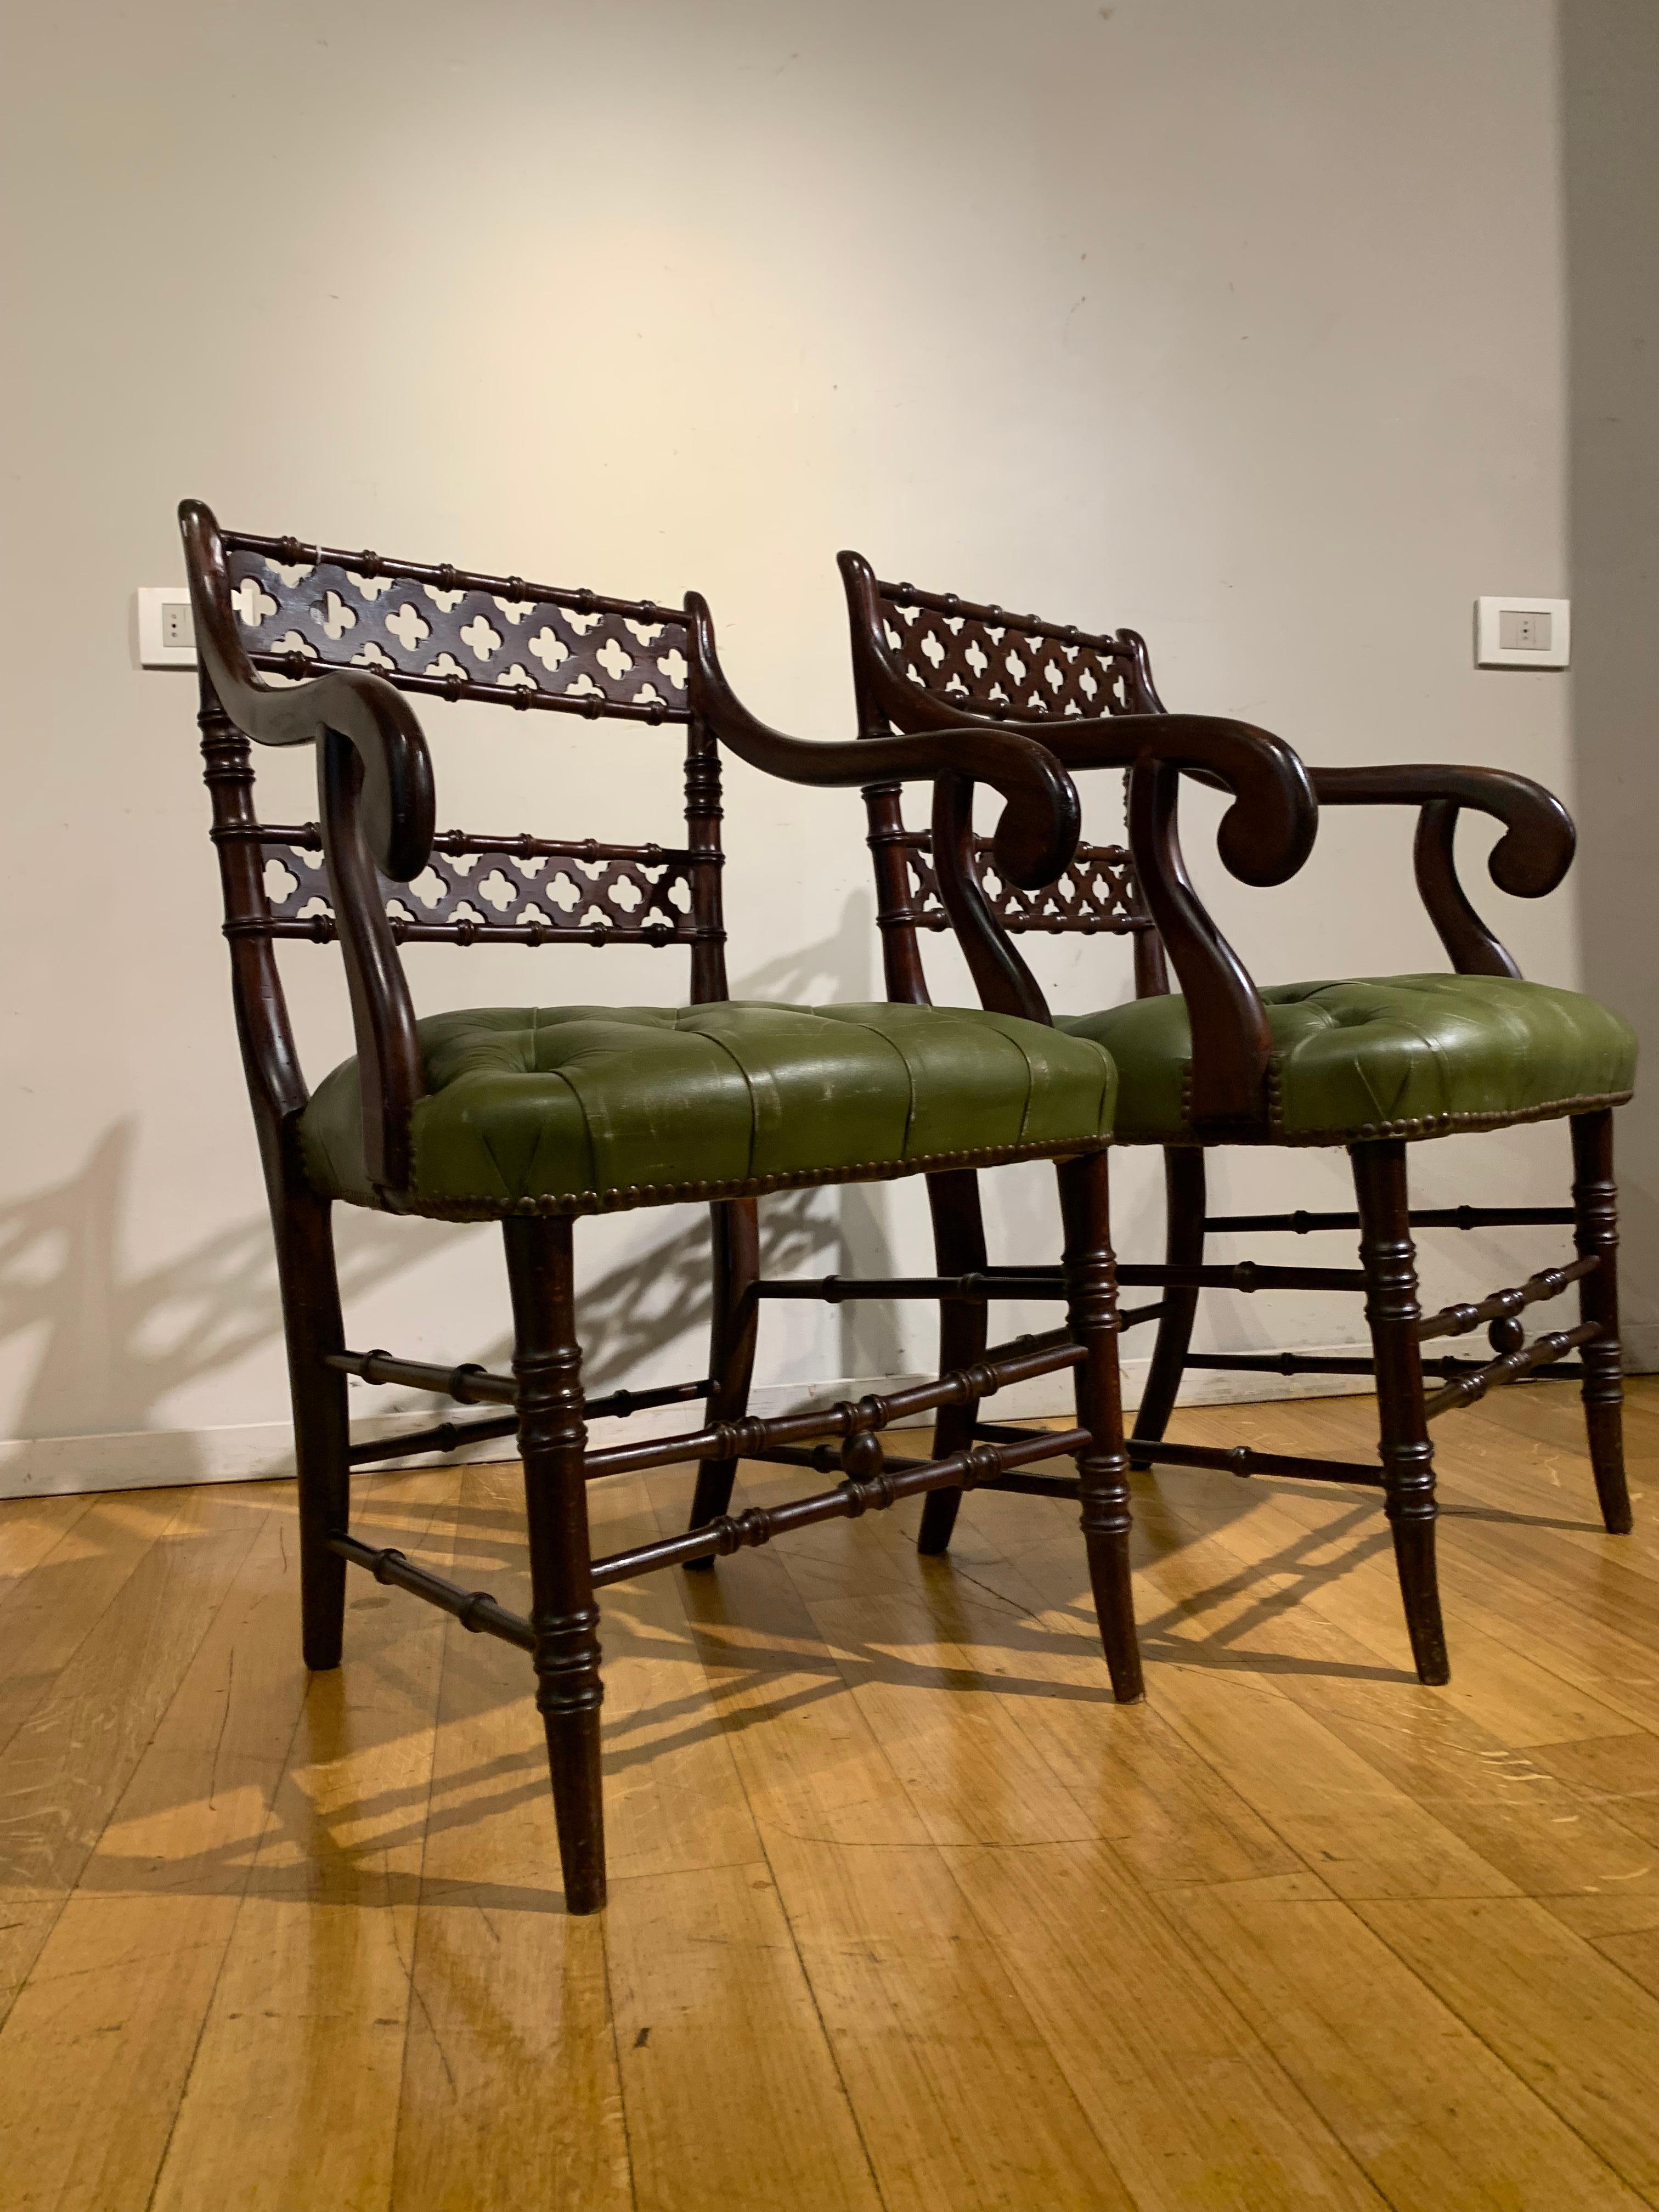 Beautiful pair of carved mahogany red bamboo-type armchairs with carvings on the perforated backs.
Particular seats upholstered in green leather capitonnè in Chester style.
English manufacture from the second half of the 19th century.